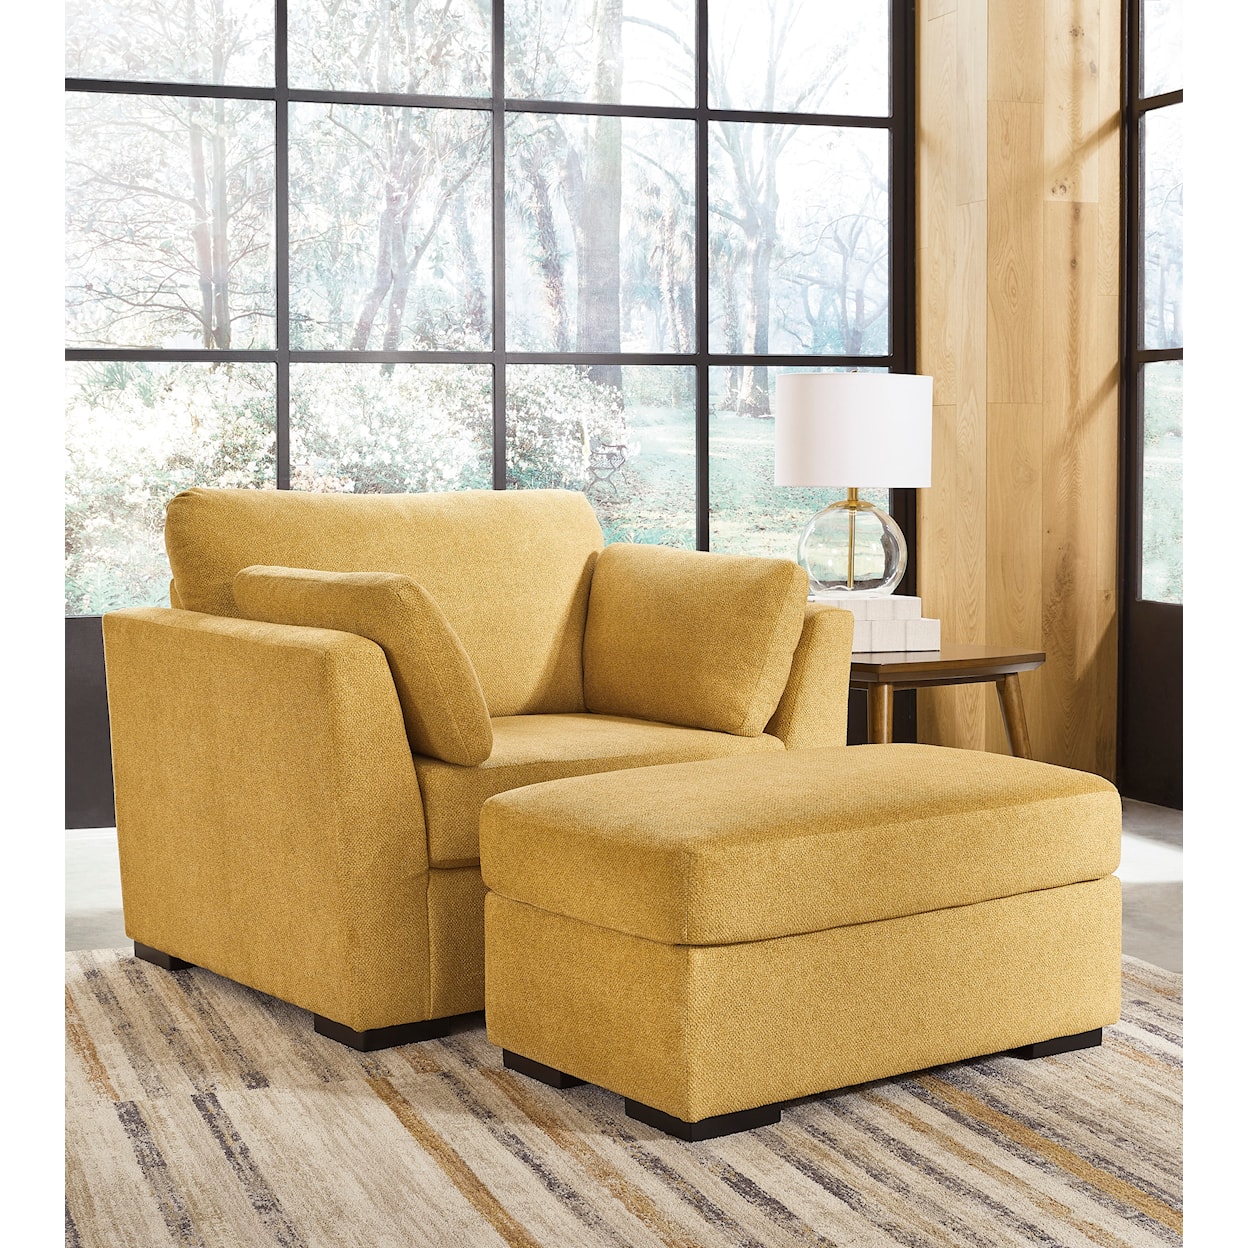 Ashley Furniture Signature Design Keerwick Oversized Chair and Ottoman